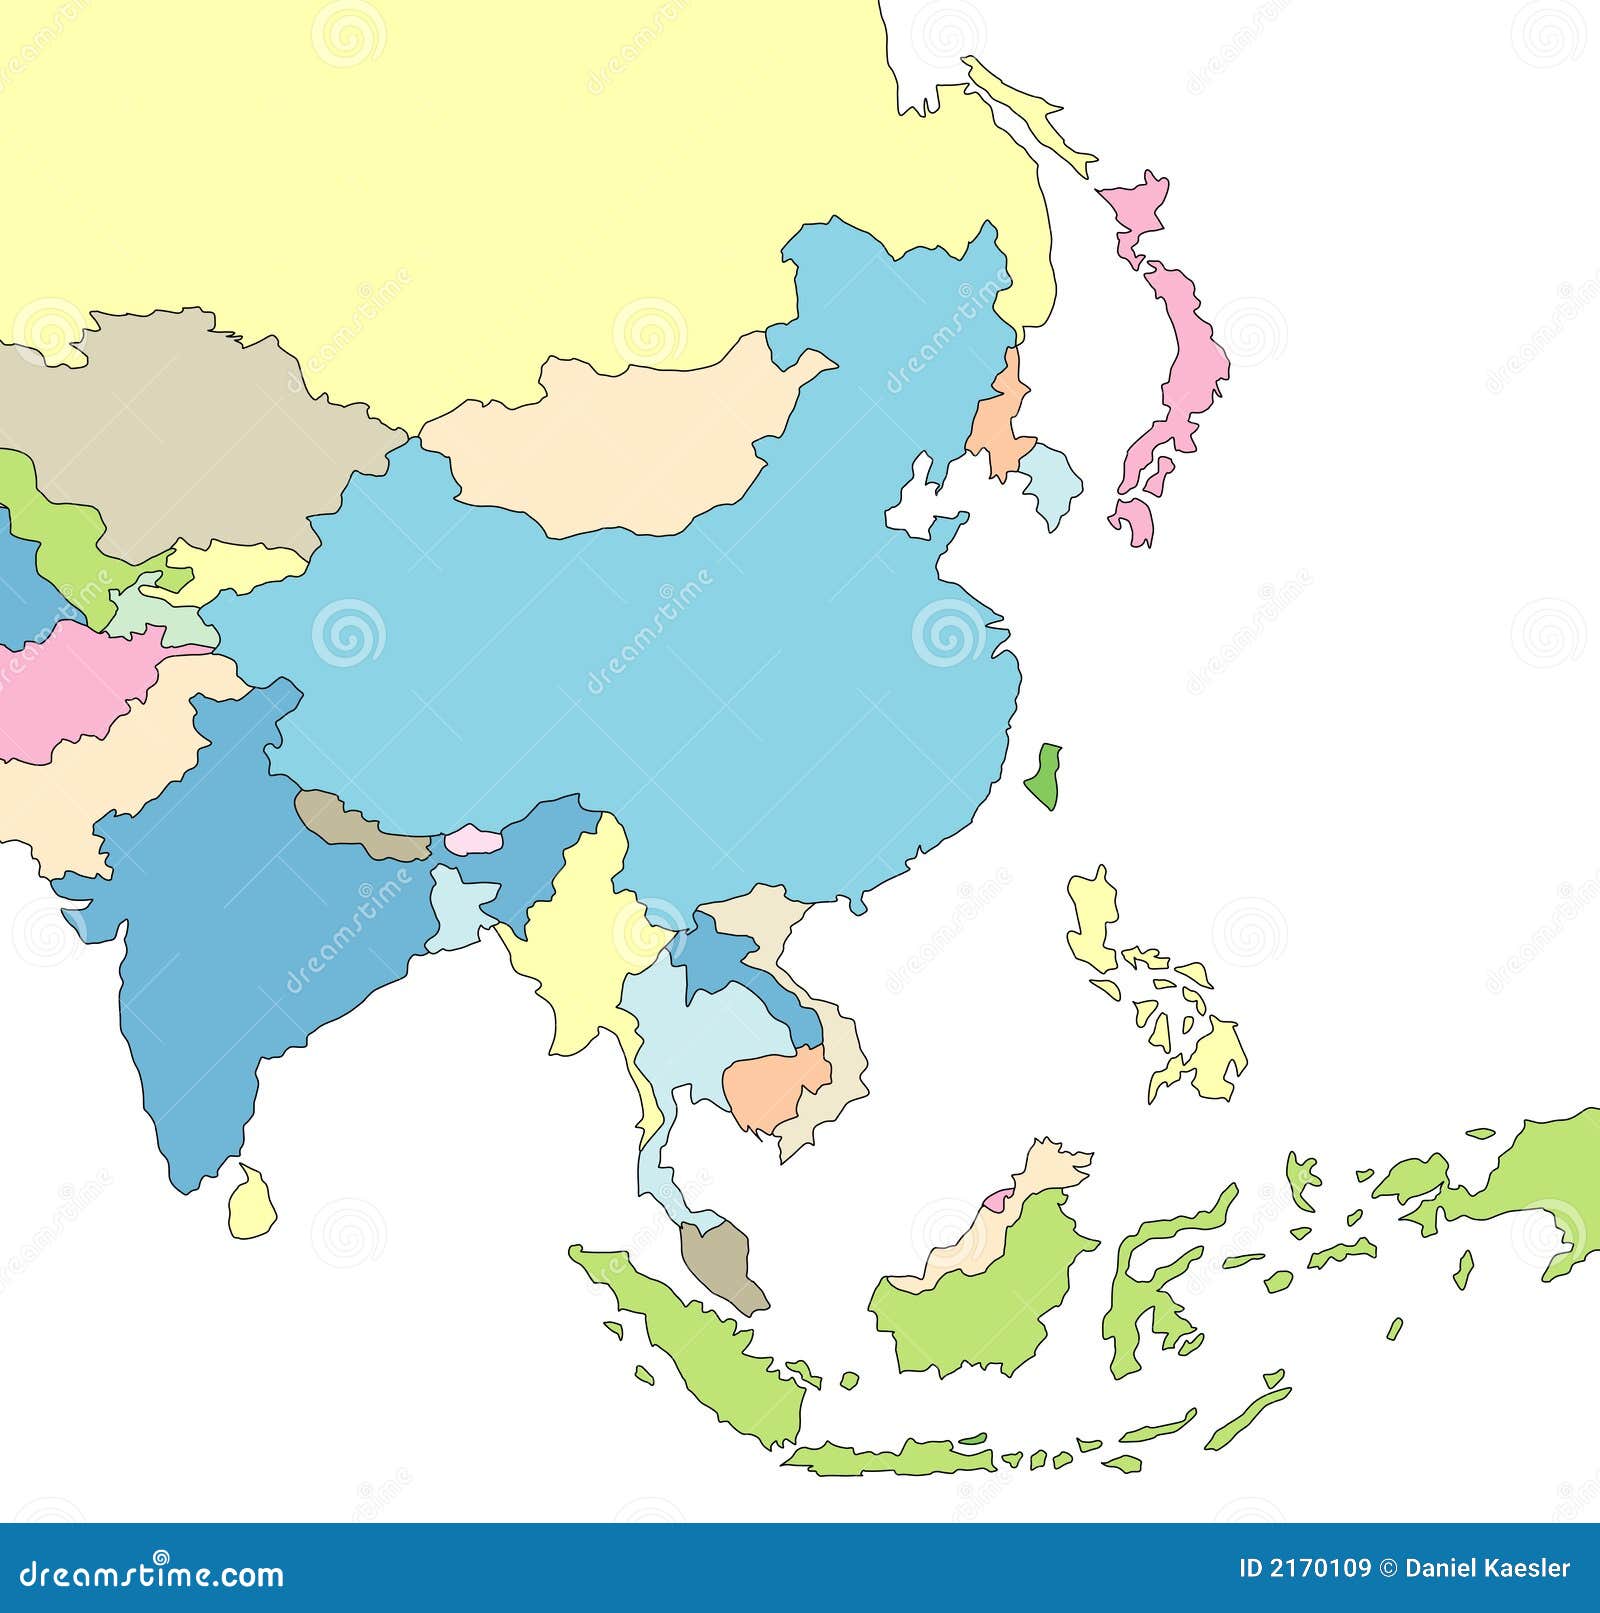 clipart map of asia - photo #33